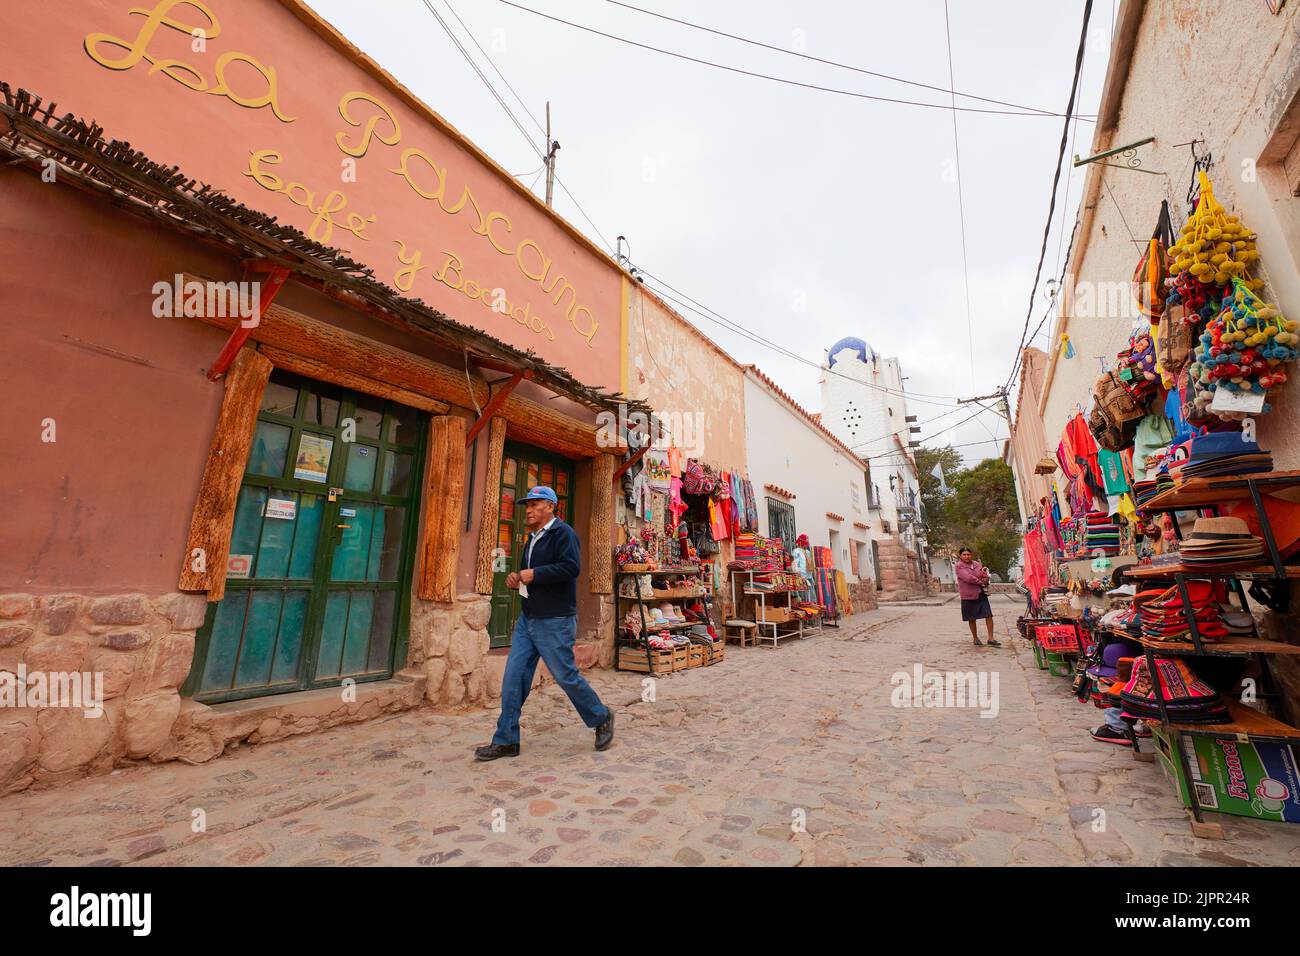 A street of the Humahuaca town historical cask, Jujuy province, Argentina. Stock Photo